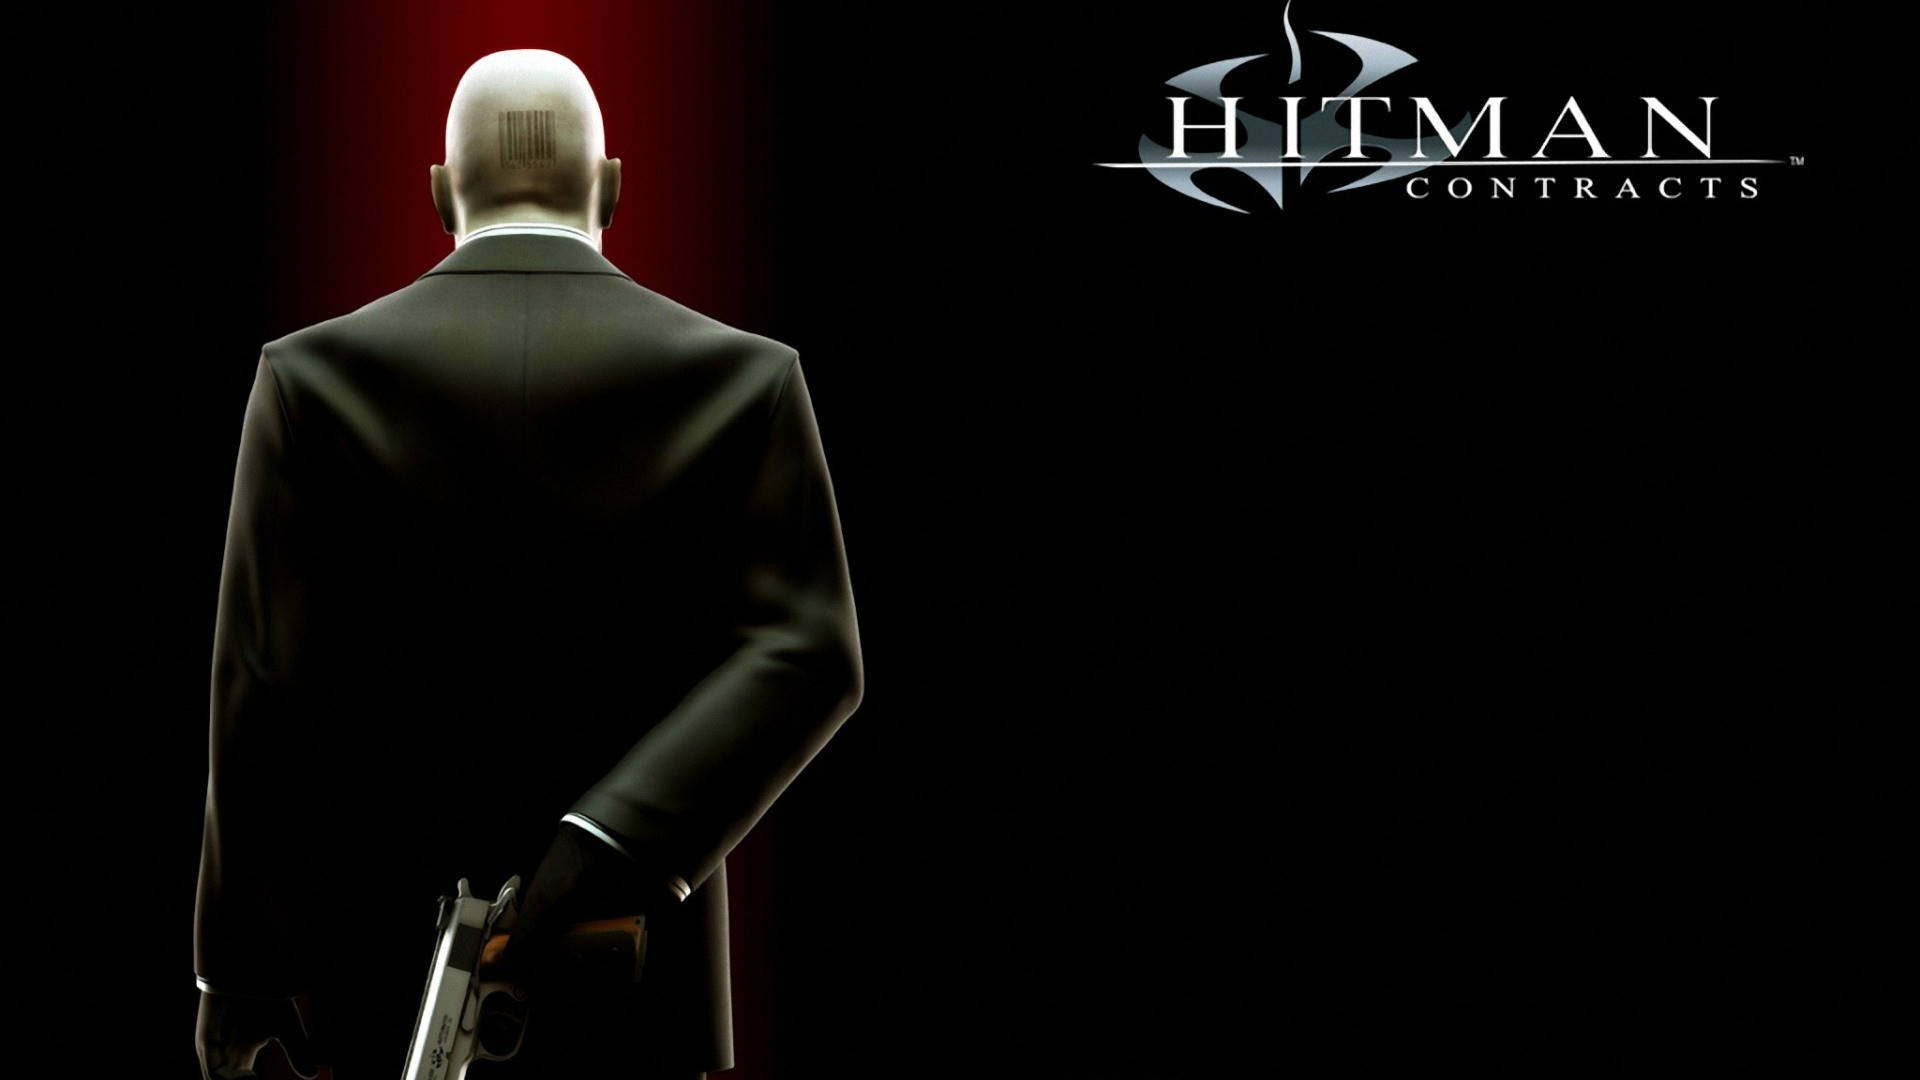 Hitman Contracts - The Silent Assassin Is Back Wallpaper